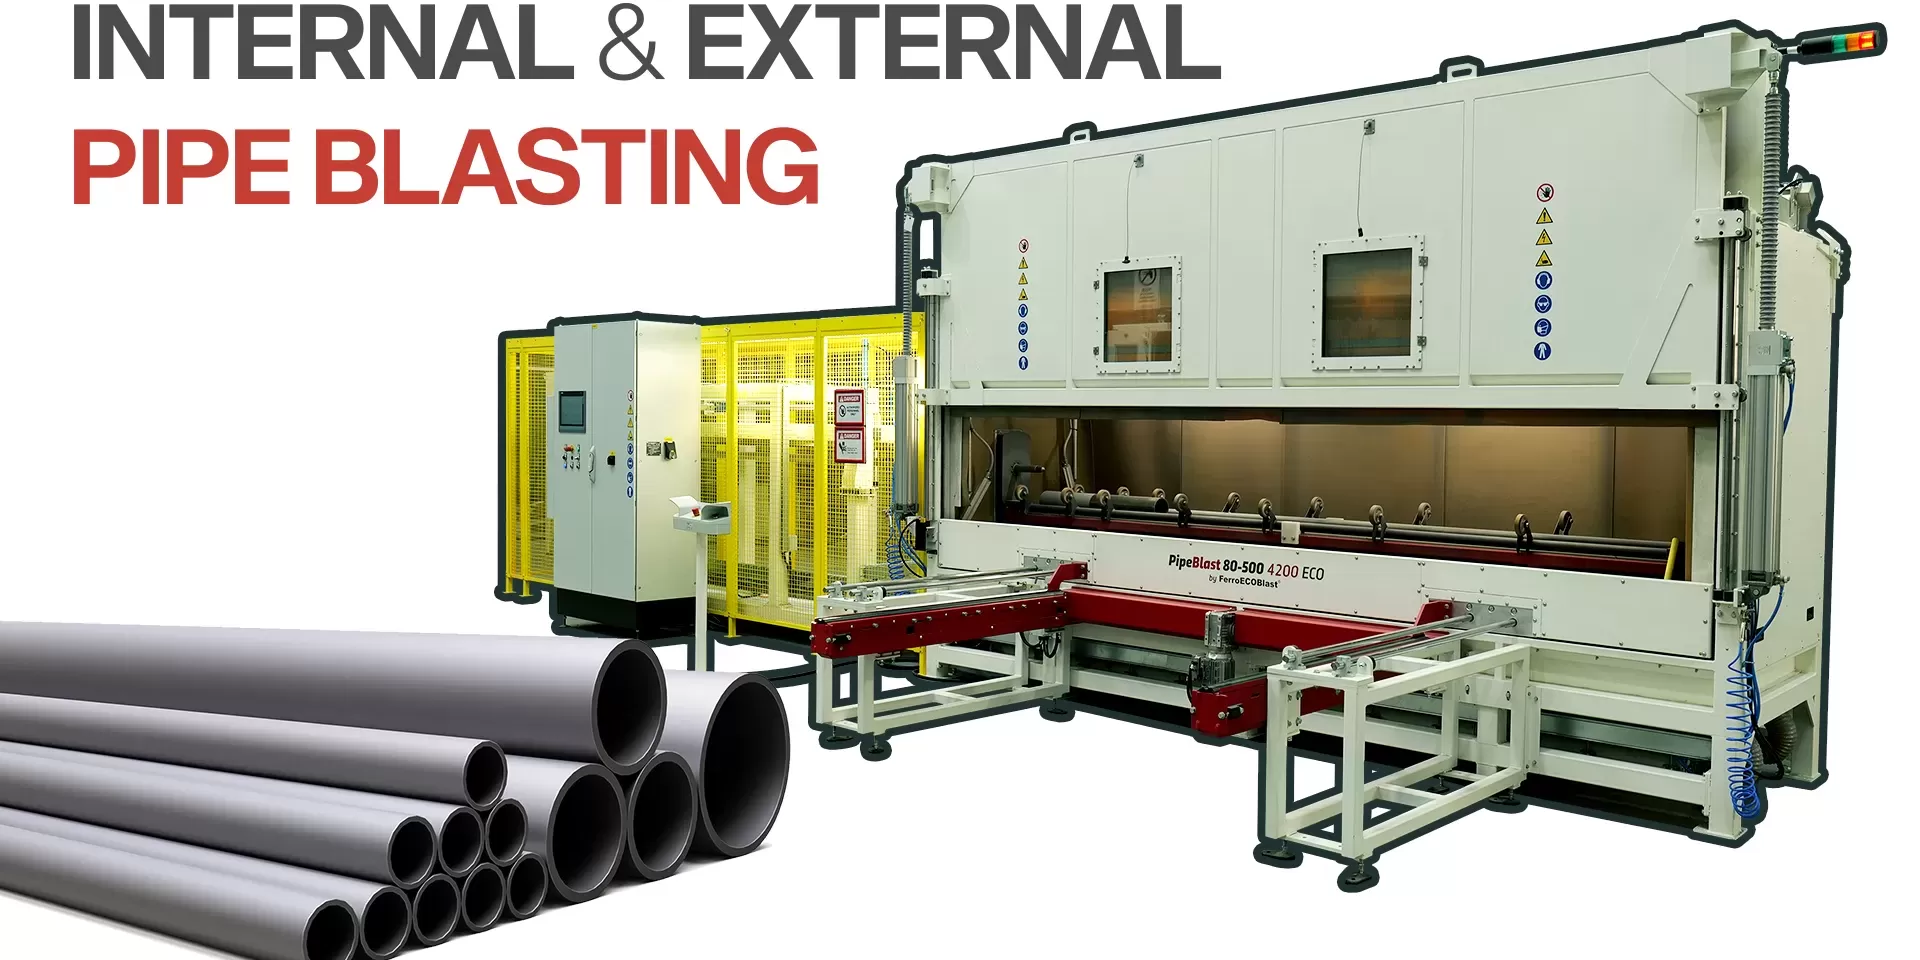 New Video - External and Internal blasting of pipes
